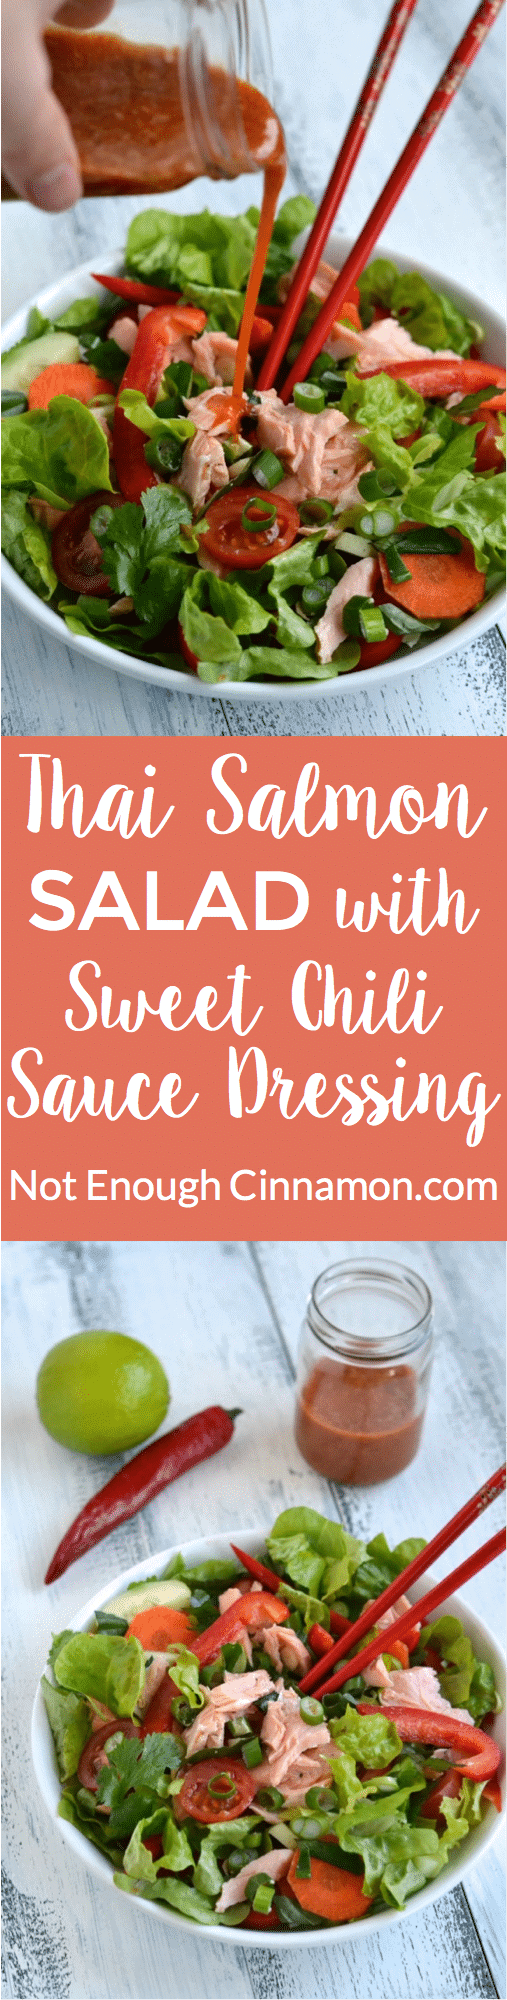 Thai Salmon Salad with Sweet Chili Sauce Dressing - find the recipe on NotEnoughCinnamon.com